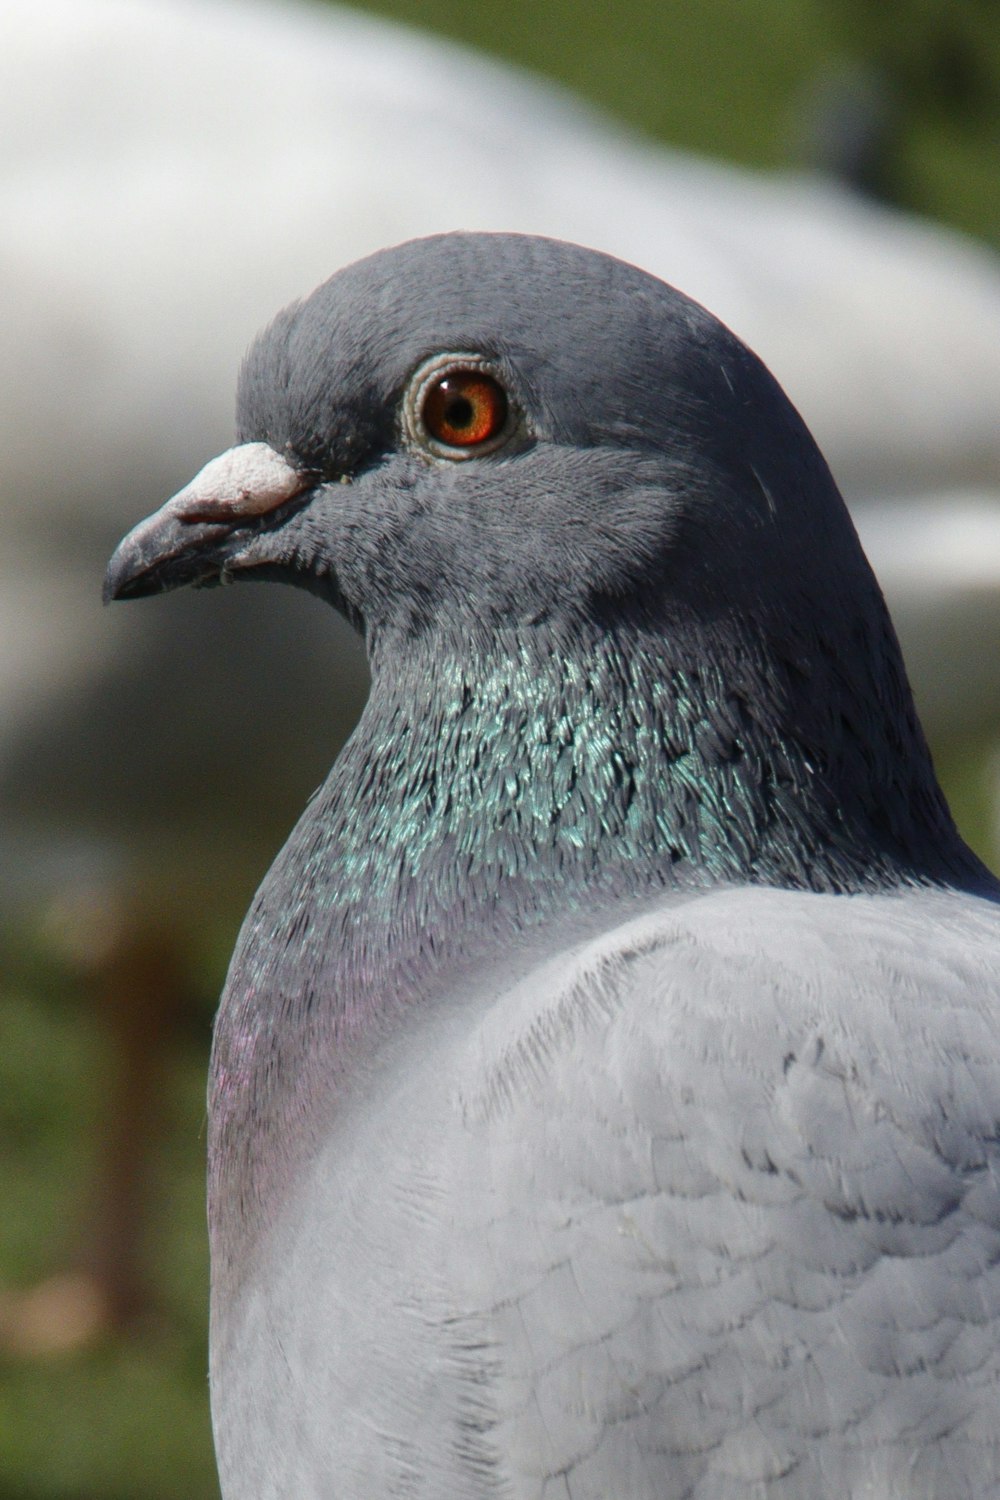 a close up of a pigeon with other birds in the background